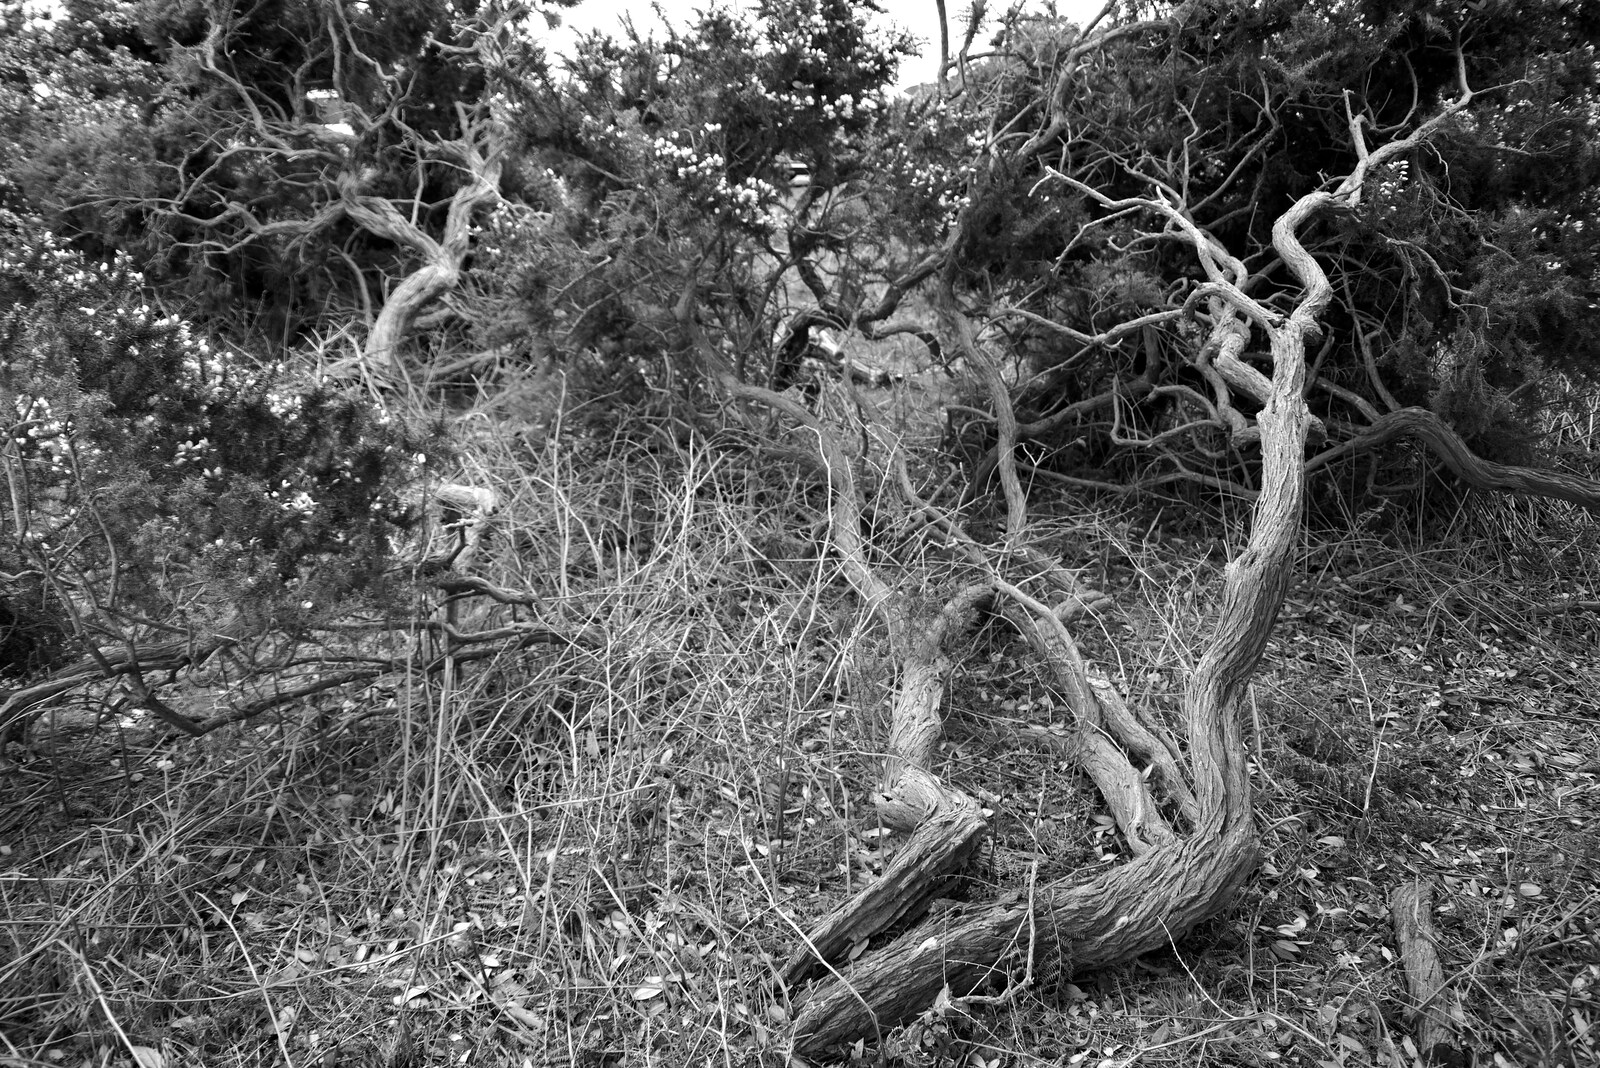 Gnarly gorse bushes from A Trip to Dunwich Beach, Dunwich, Suffolk - 2nd April 2021